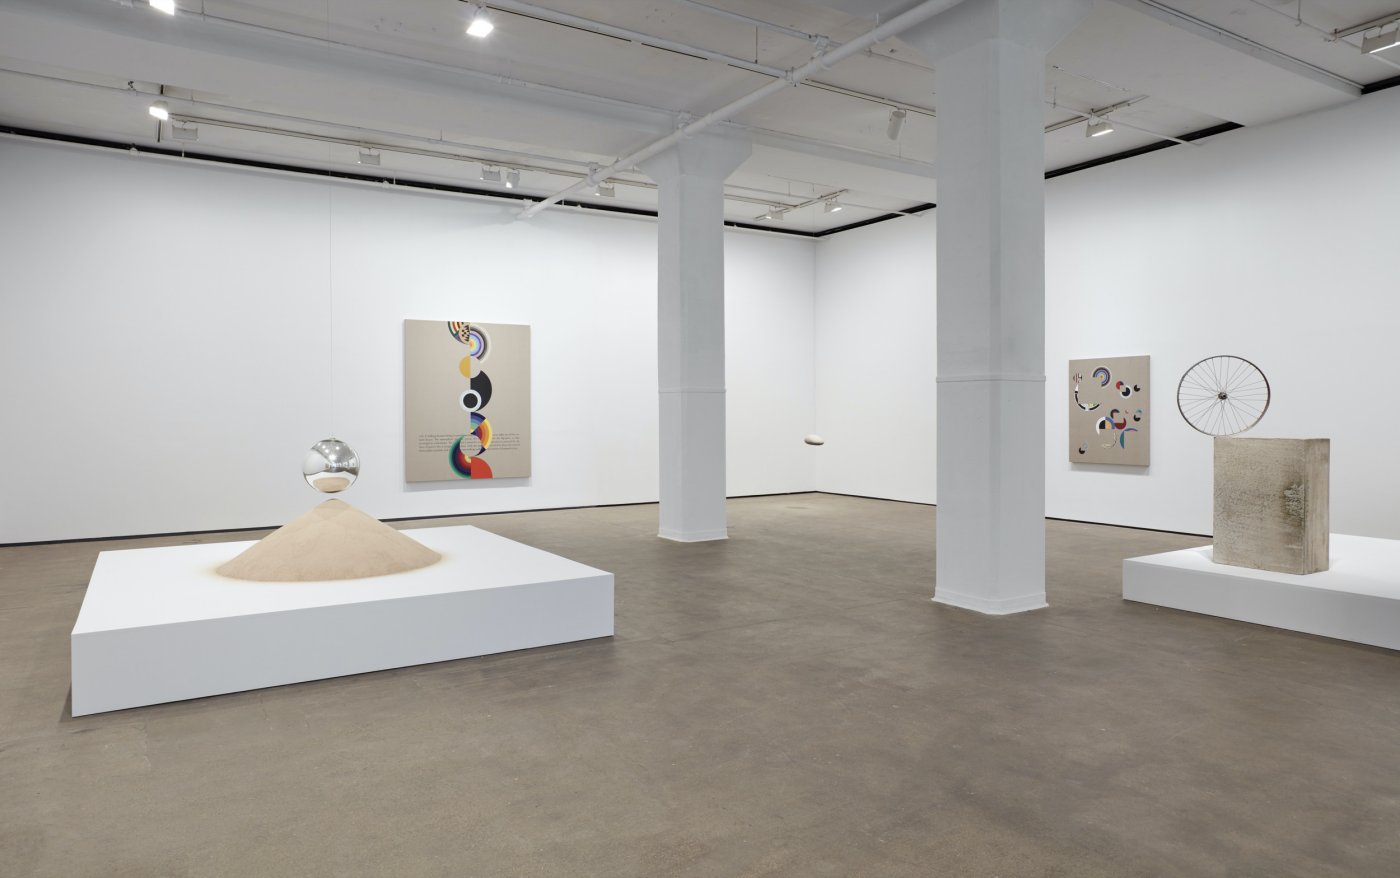 Installation image for Jose Dávila in The Circularity of Desire, at Sean Kelly Gallery